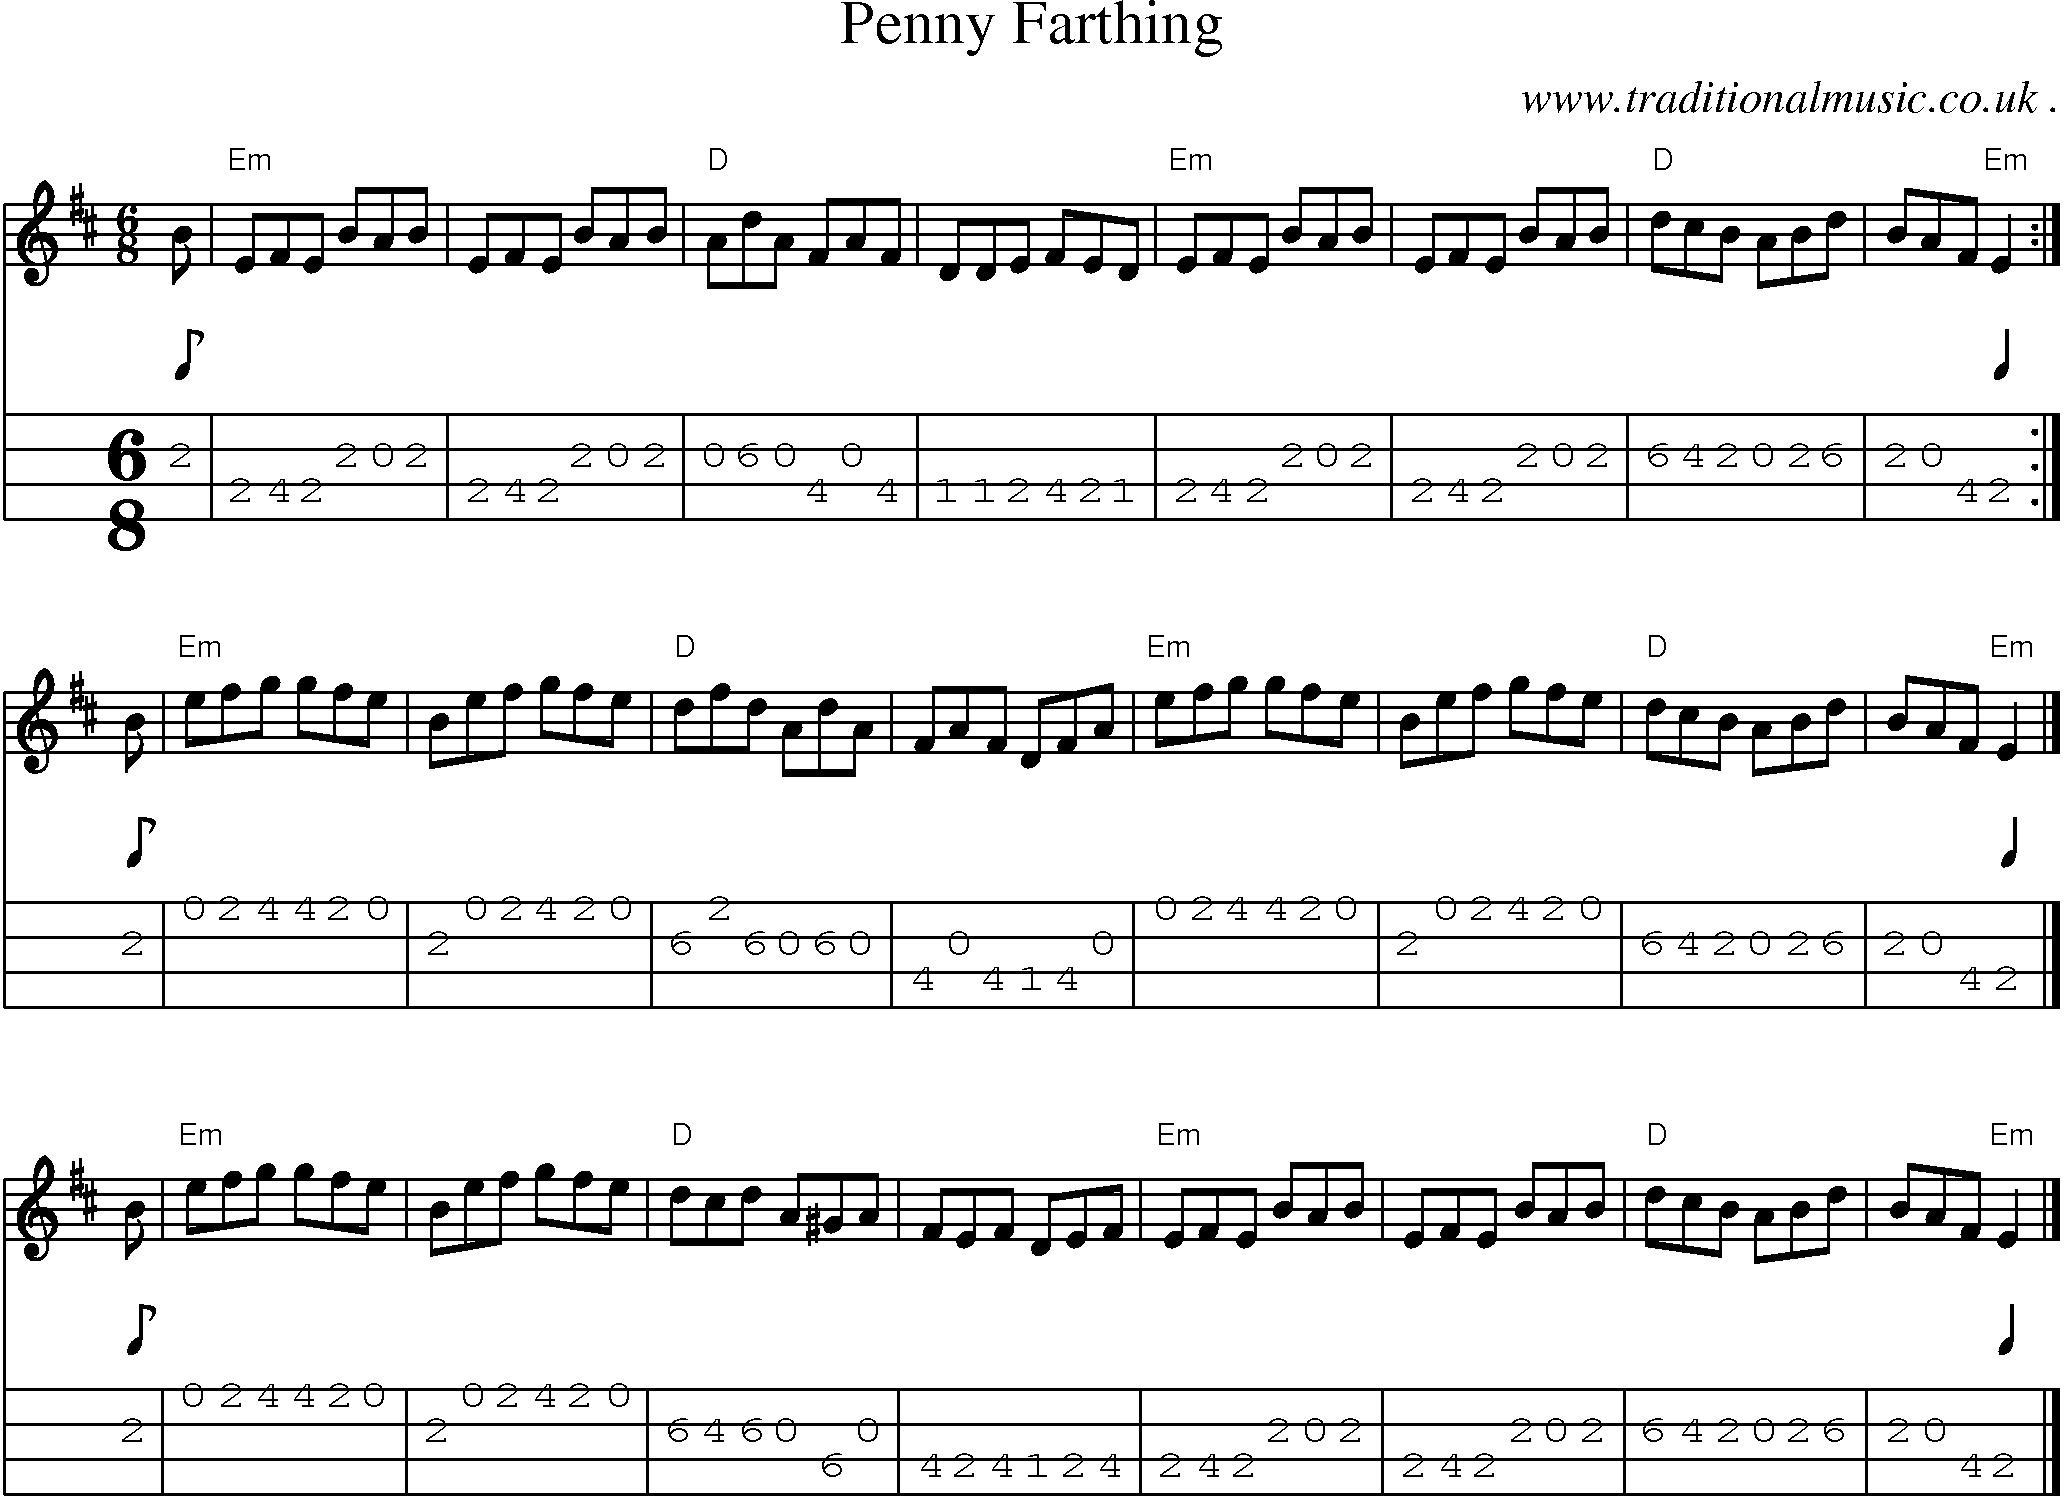 Sheet-music  score, Chords and Mandolin Tabs for Penny Farthing